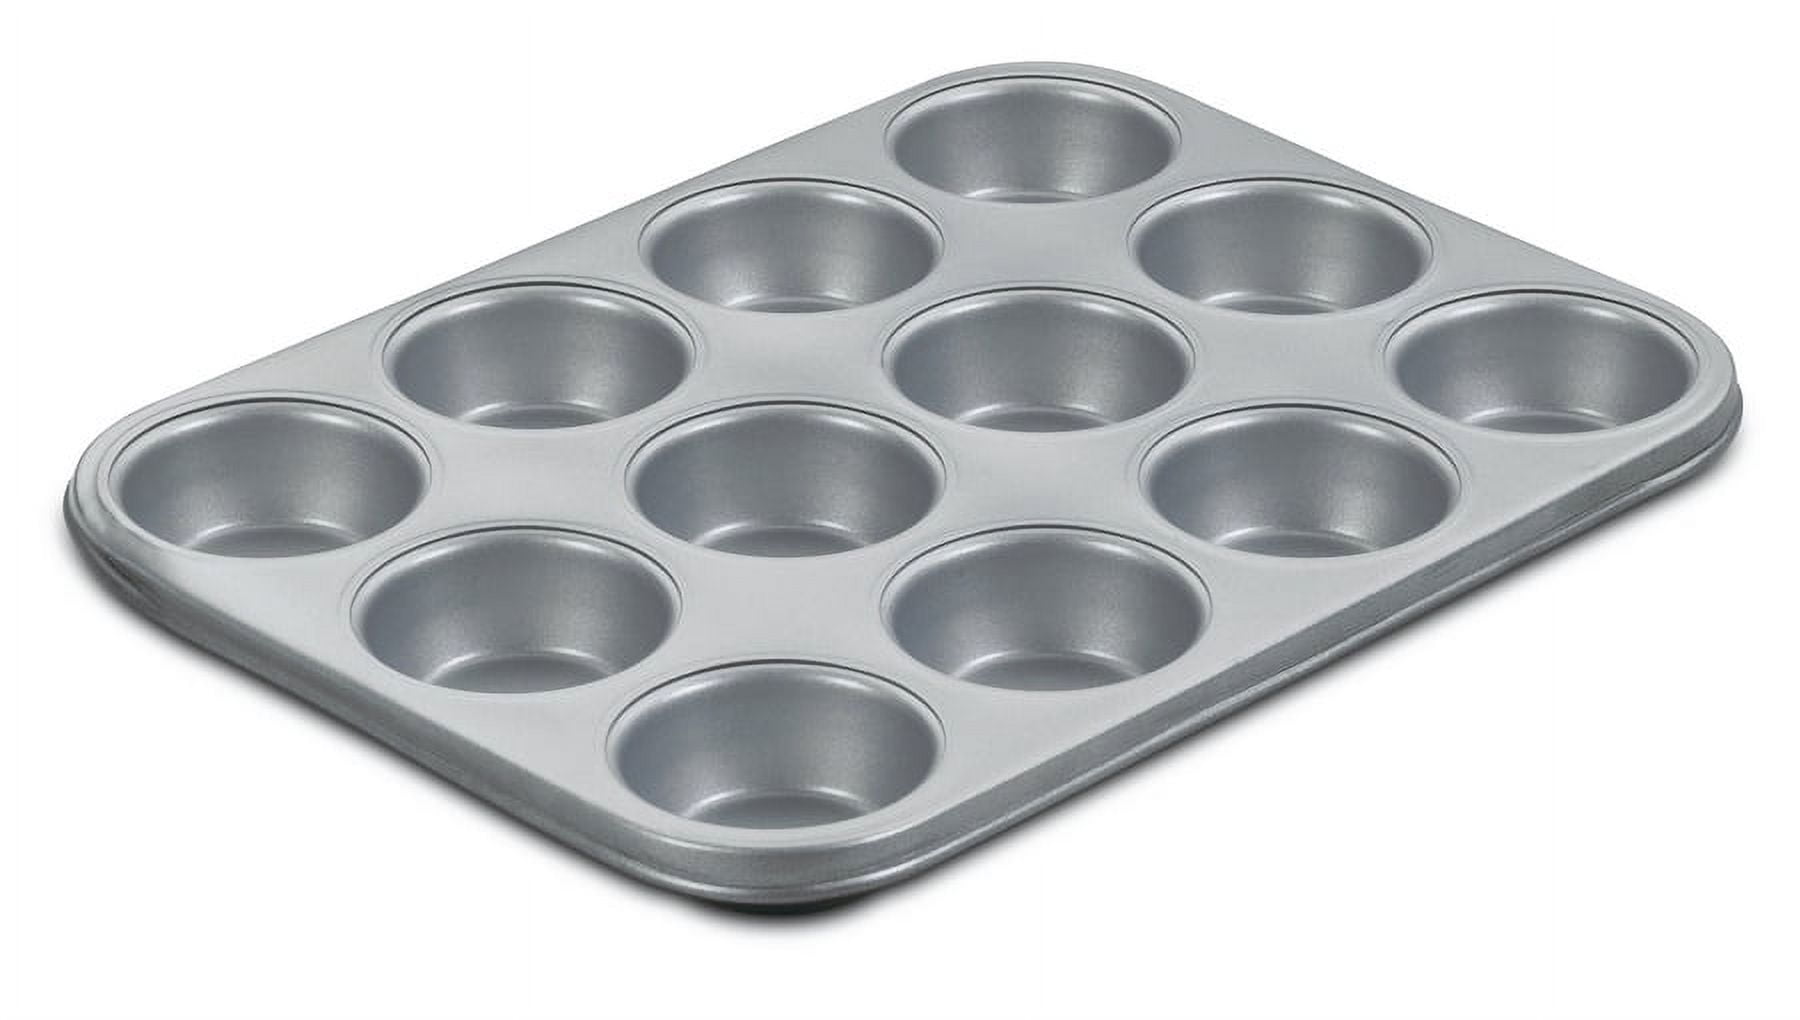 Pampered chef 1465 Stoneware Muffin Pan12 Cup Classic for Sale